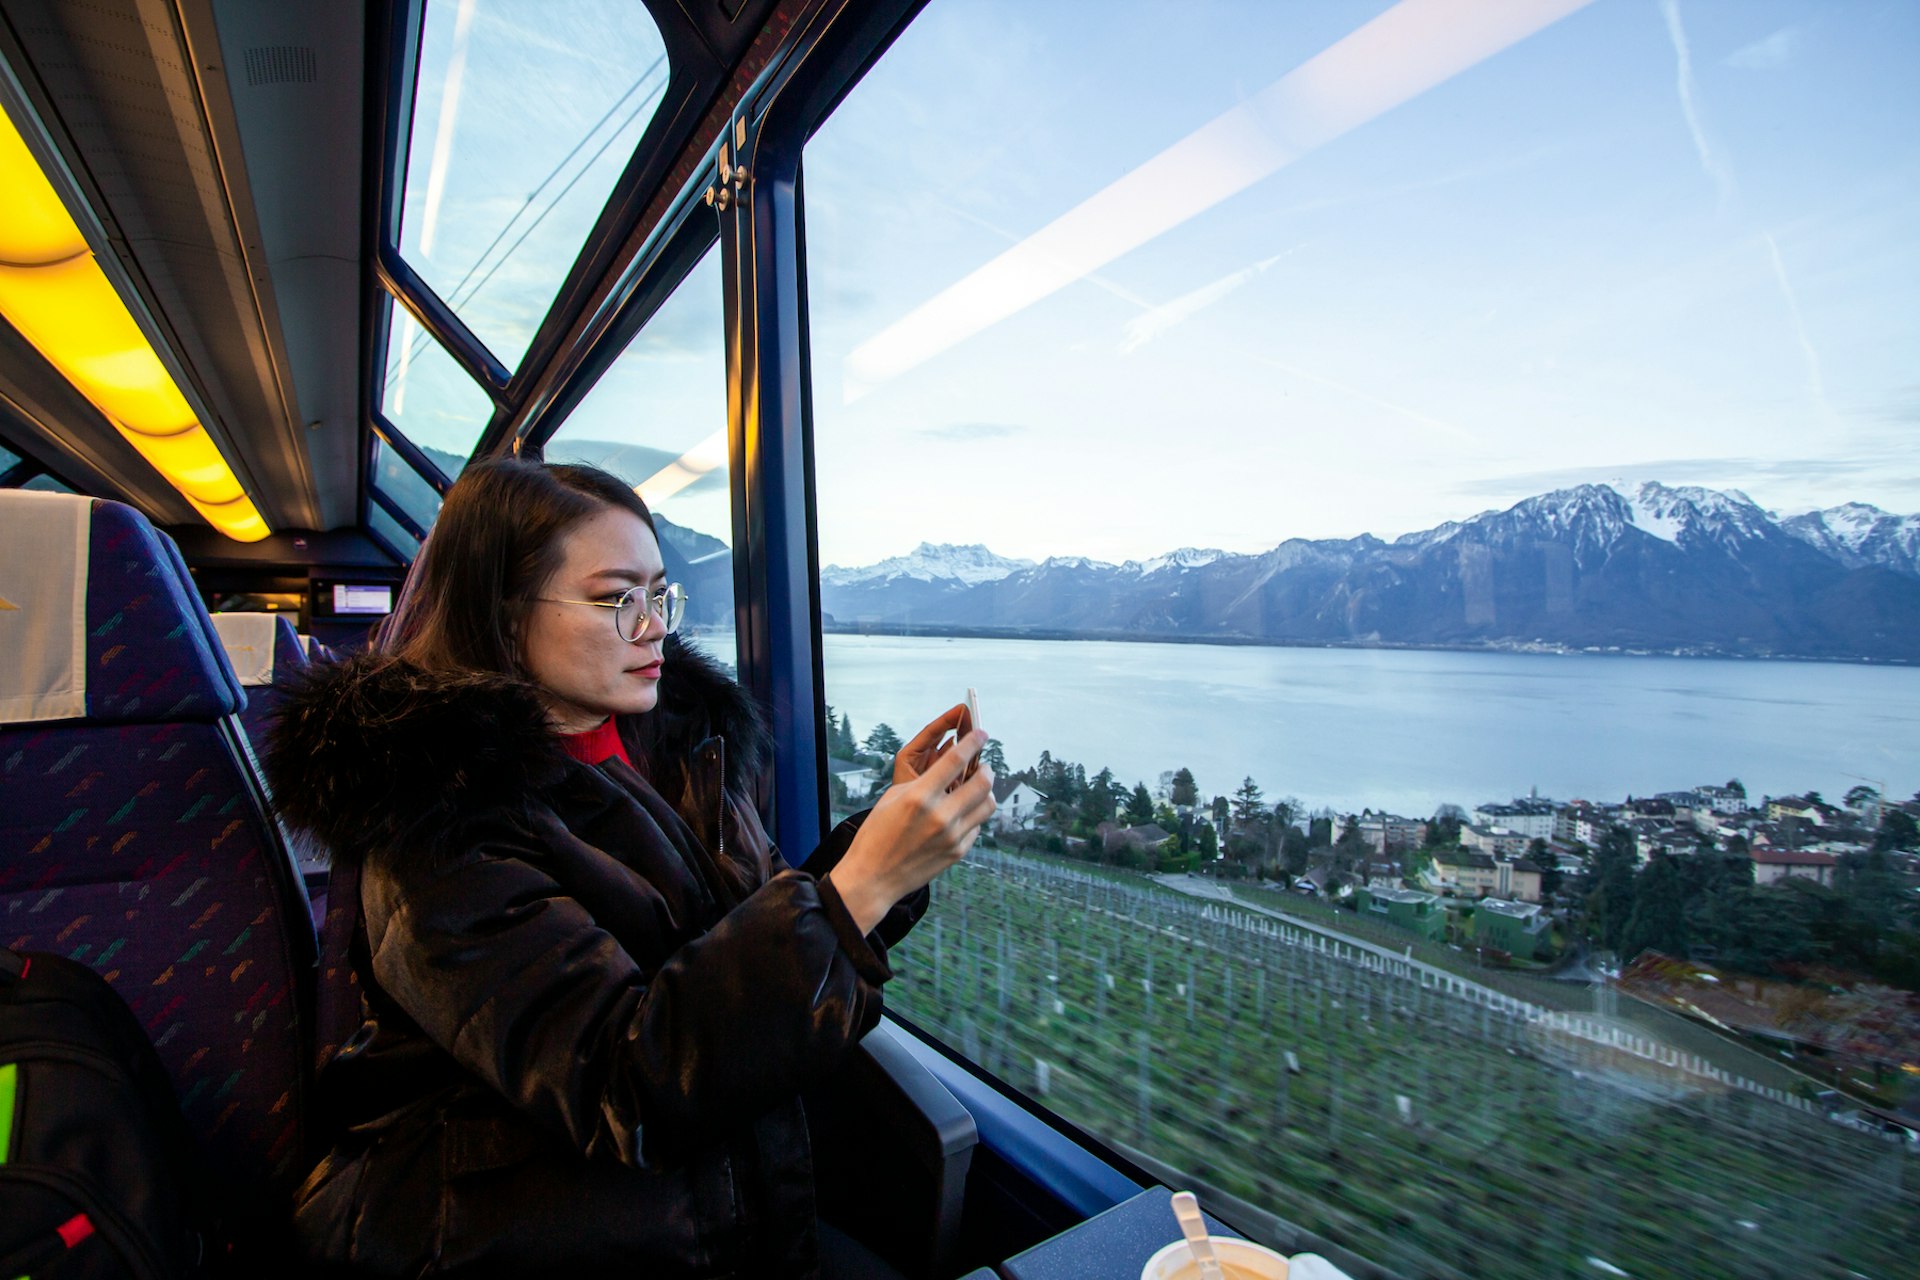 A woman taking a photo on the Ferris wheel of the Golden Pass Express train between Montreux and Interlaken Ost, Switzerland